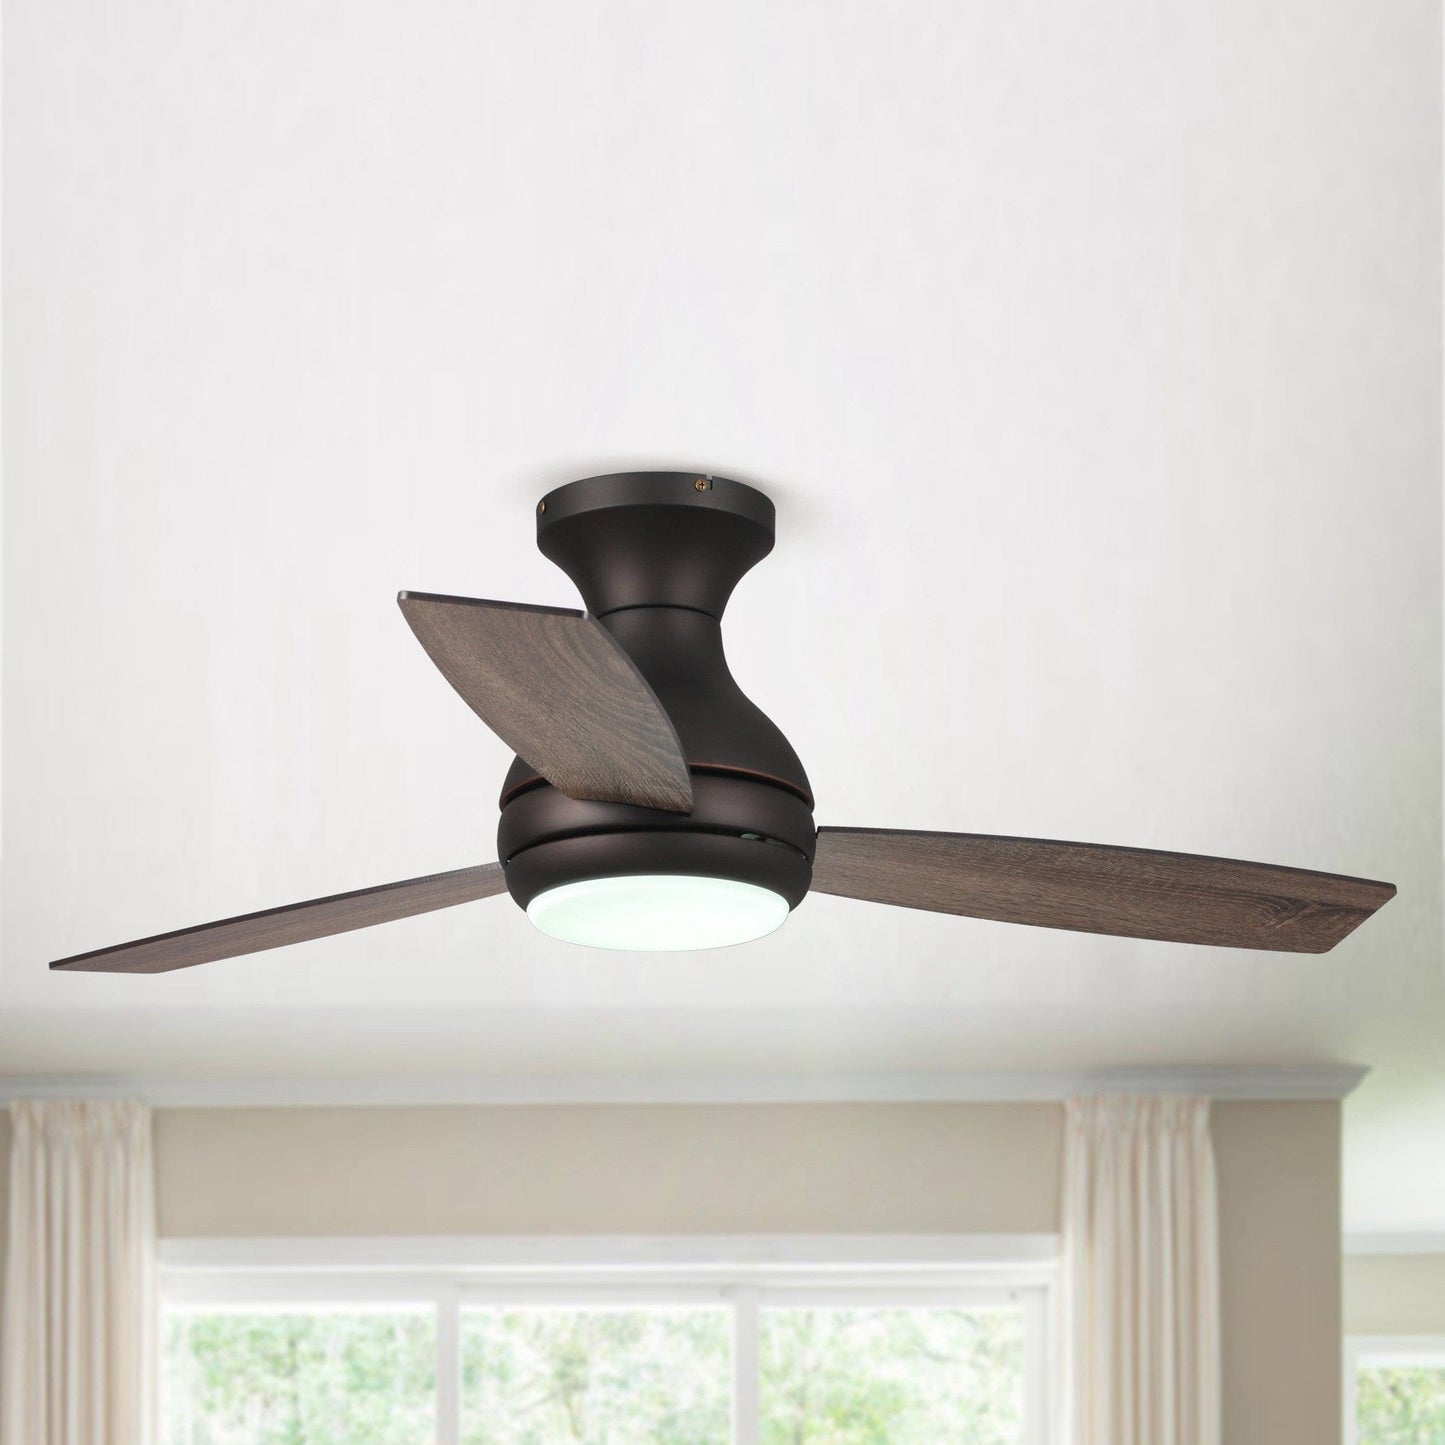 Parrot Uncle 48" Beckette Modern Flush Mount Reversible Ceiling Fan with Lighting and Remote Control